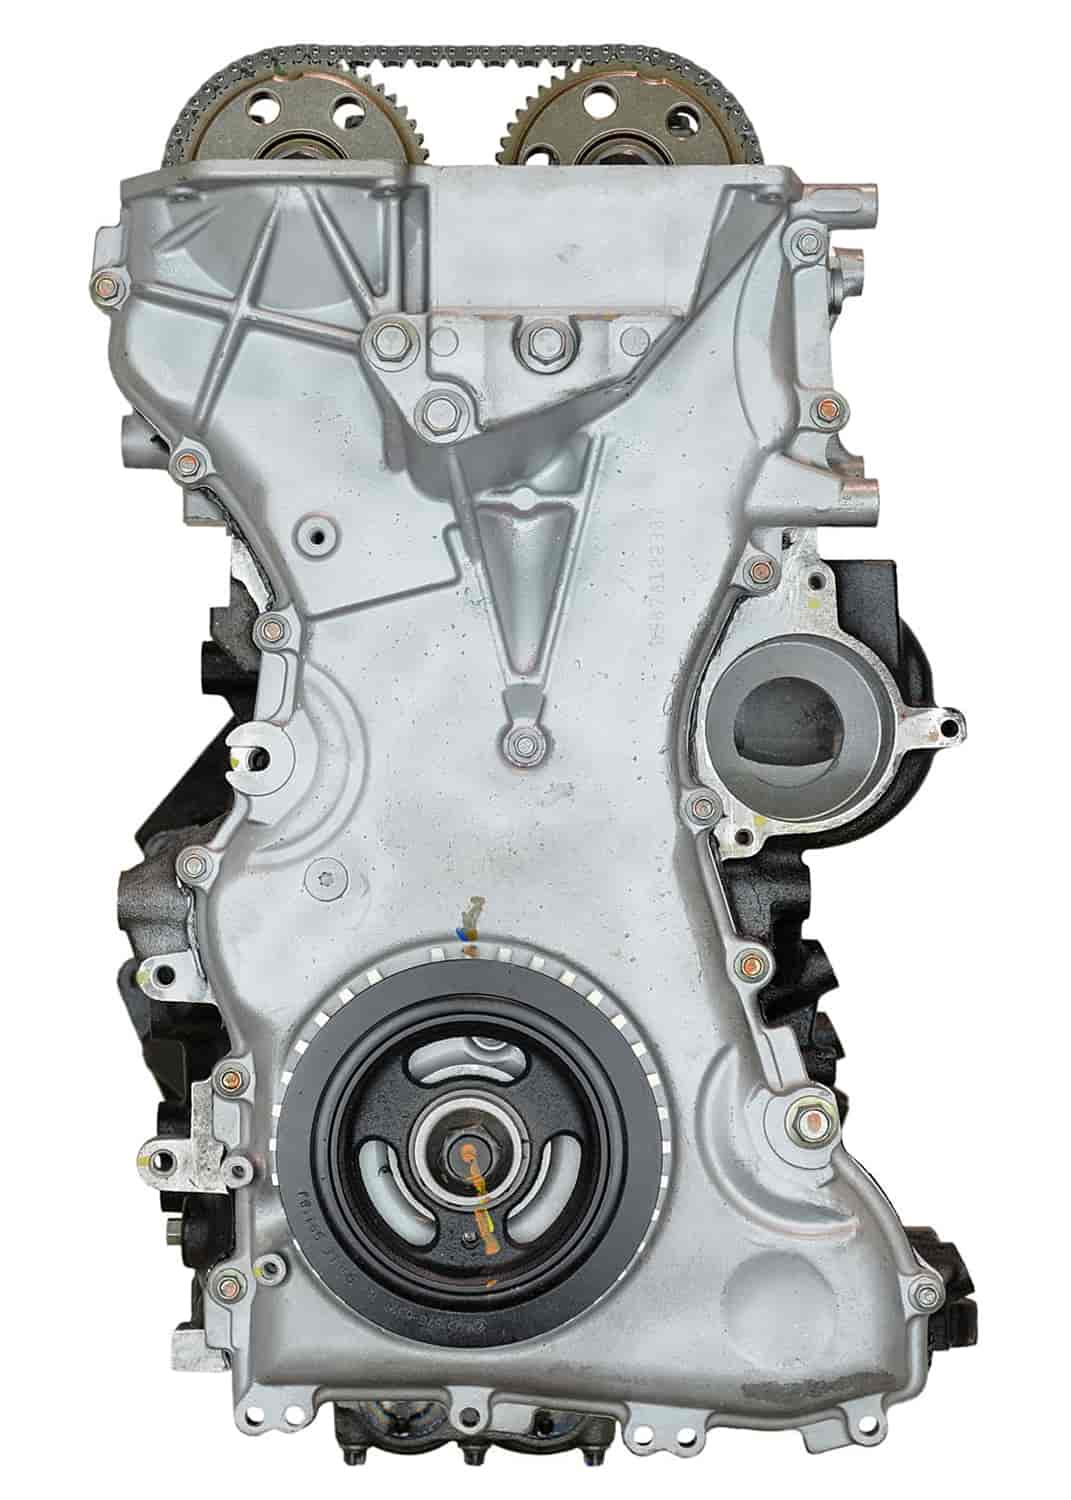 Remanufactured Crate Engine for 2003-2004 Ford Focus  with 2.3L L4